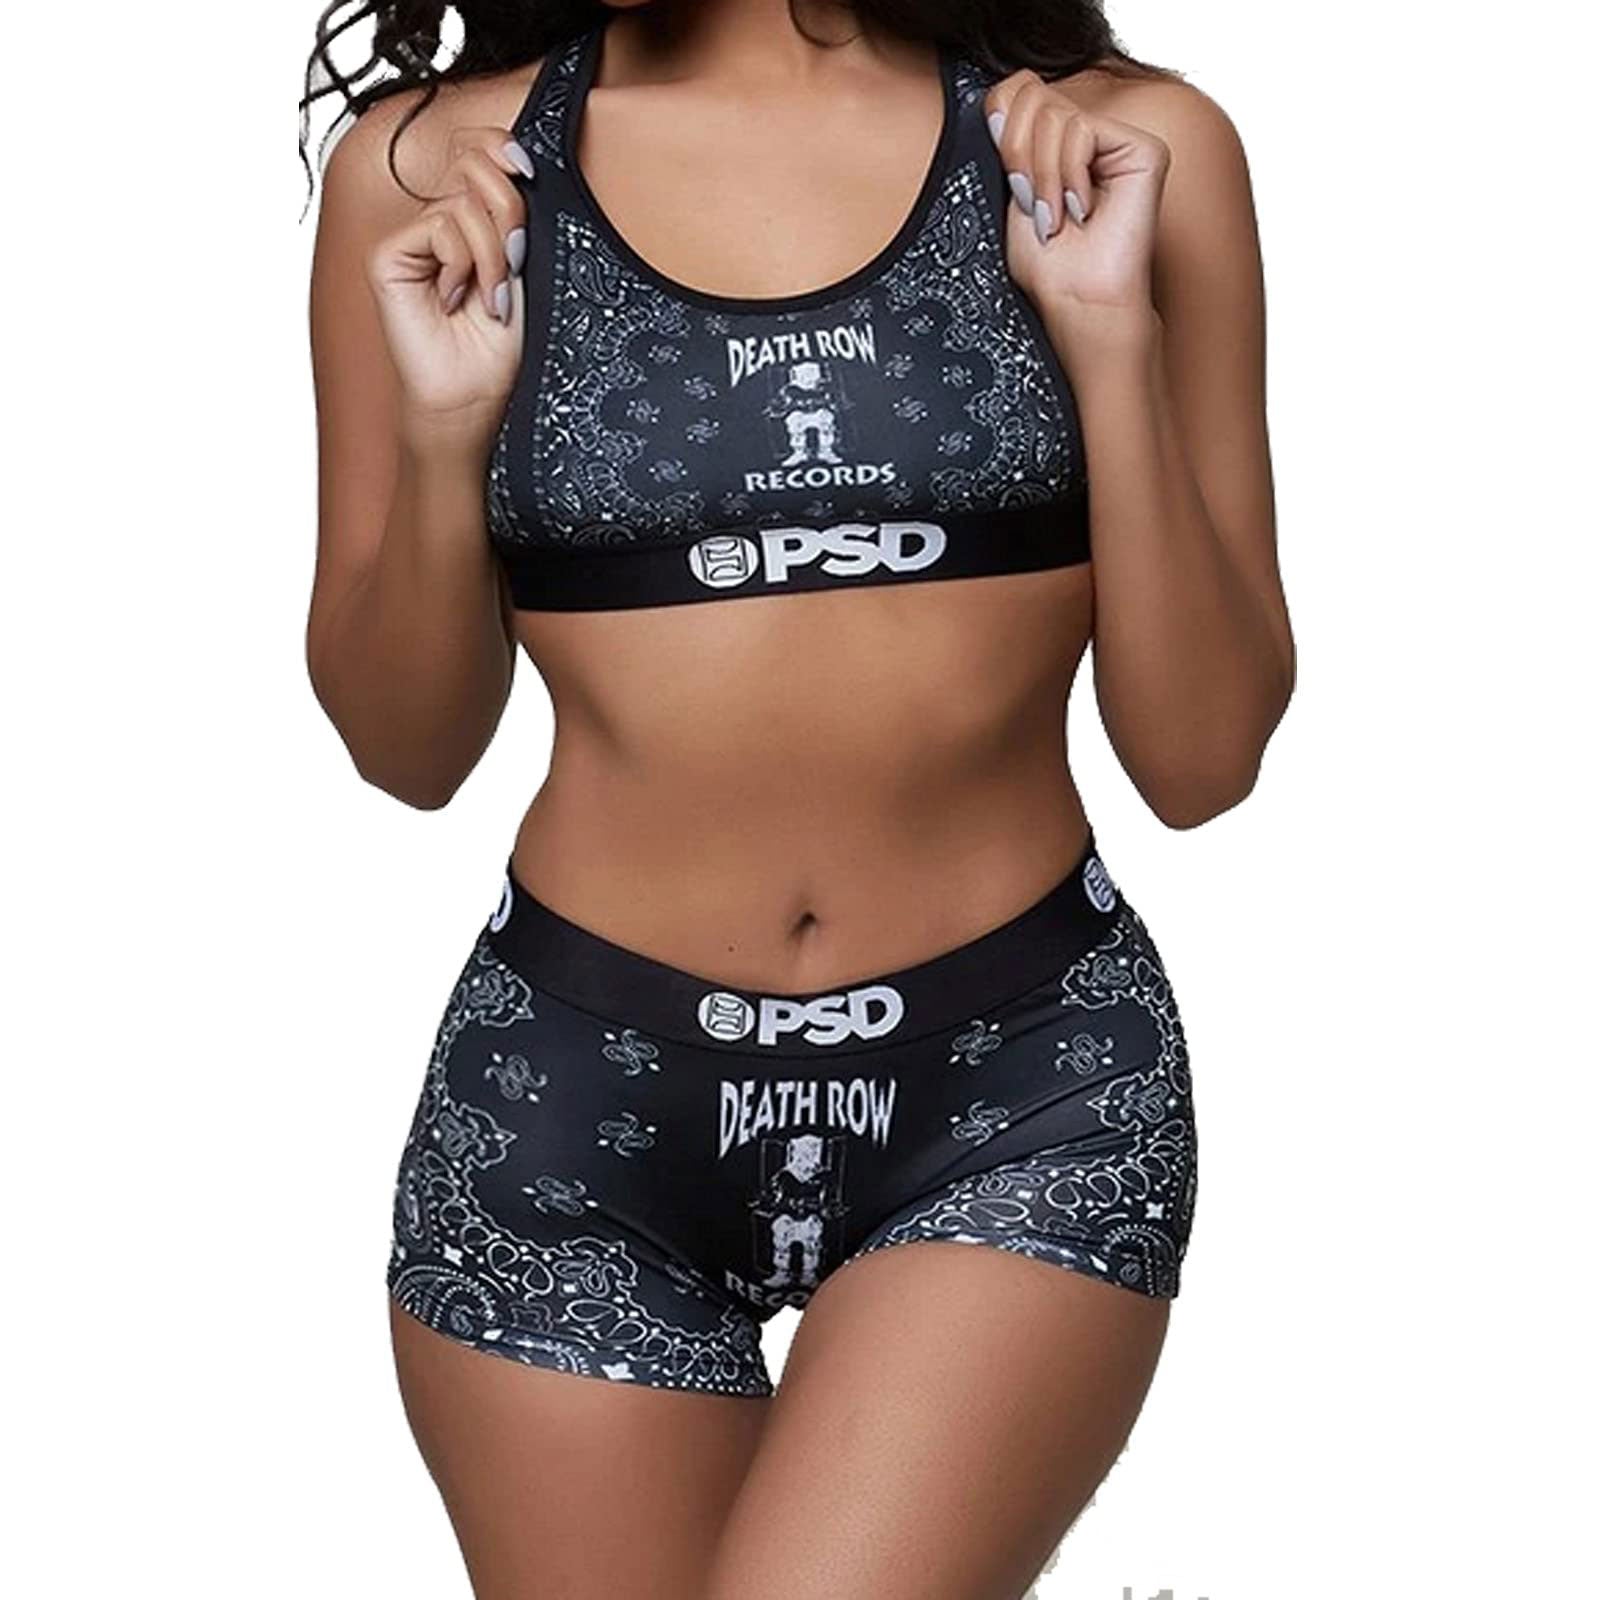 PSD Underwear on X: Who's ready for new women's styles? #WCW